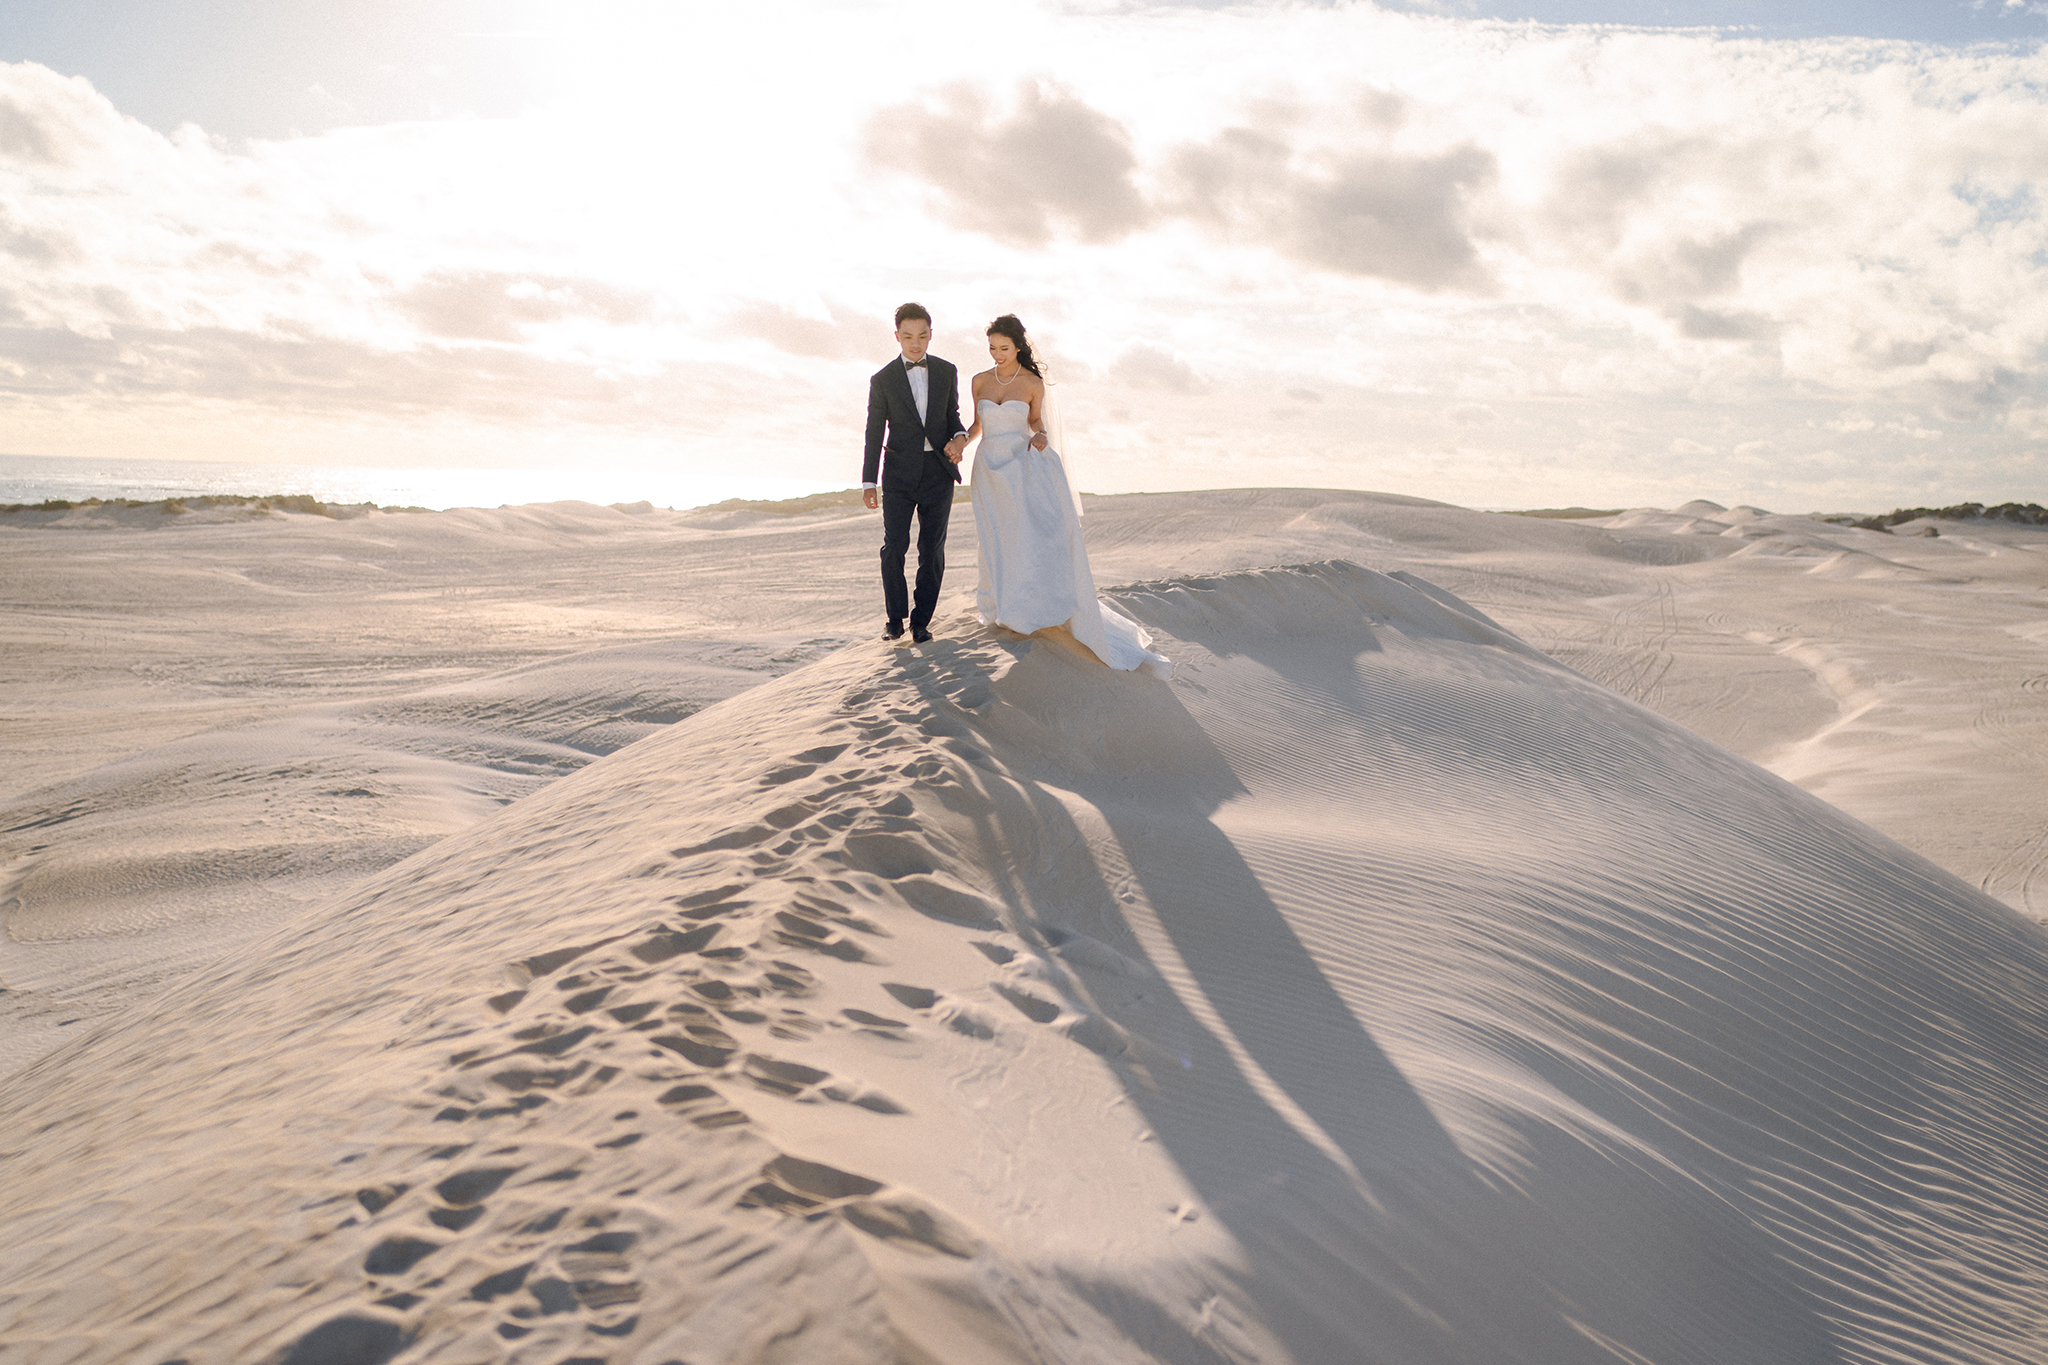 Perth Pre-Wedding Photoshoot at Lancelin Desert & Bells Lookout by Jimmy on OneThreeOneFour 20